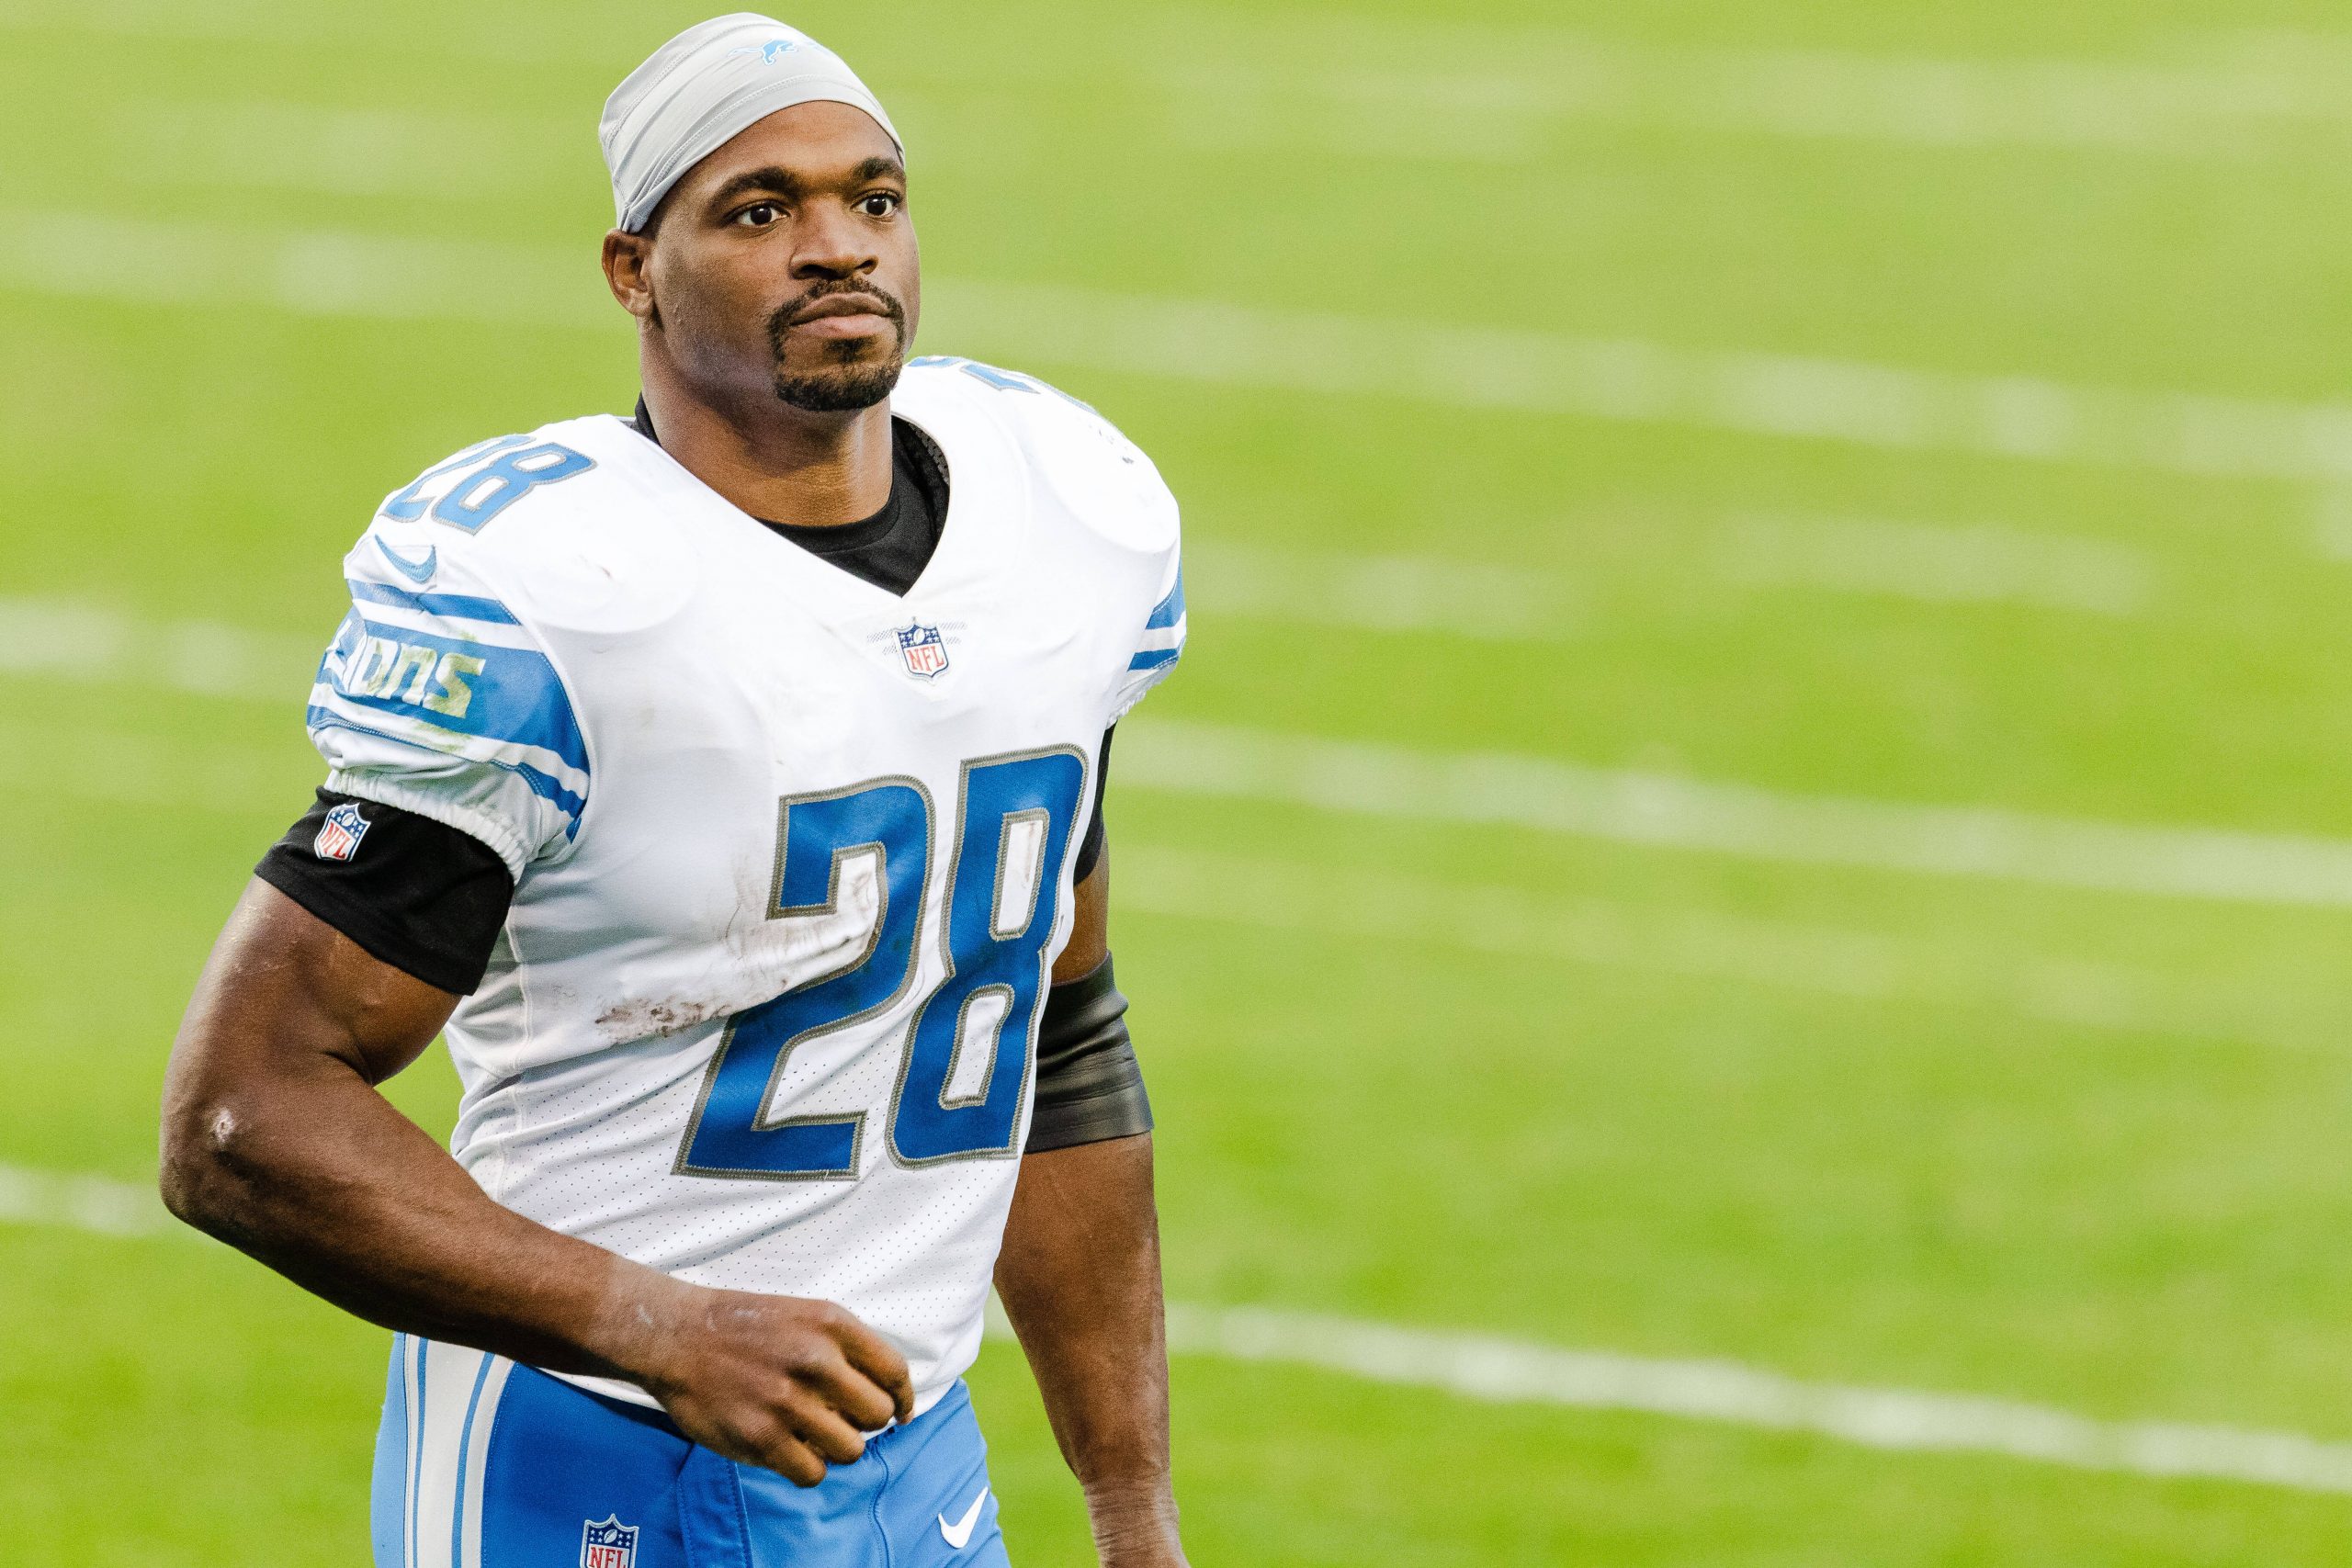 Adrian Peterson November 22, 2020: Detroit Lions running back Adrian Peterson (28) runs off the field after a loss to the Detroit Lions